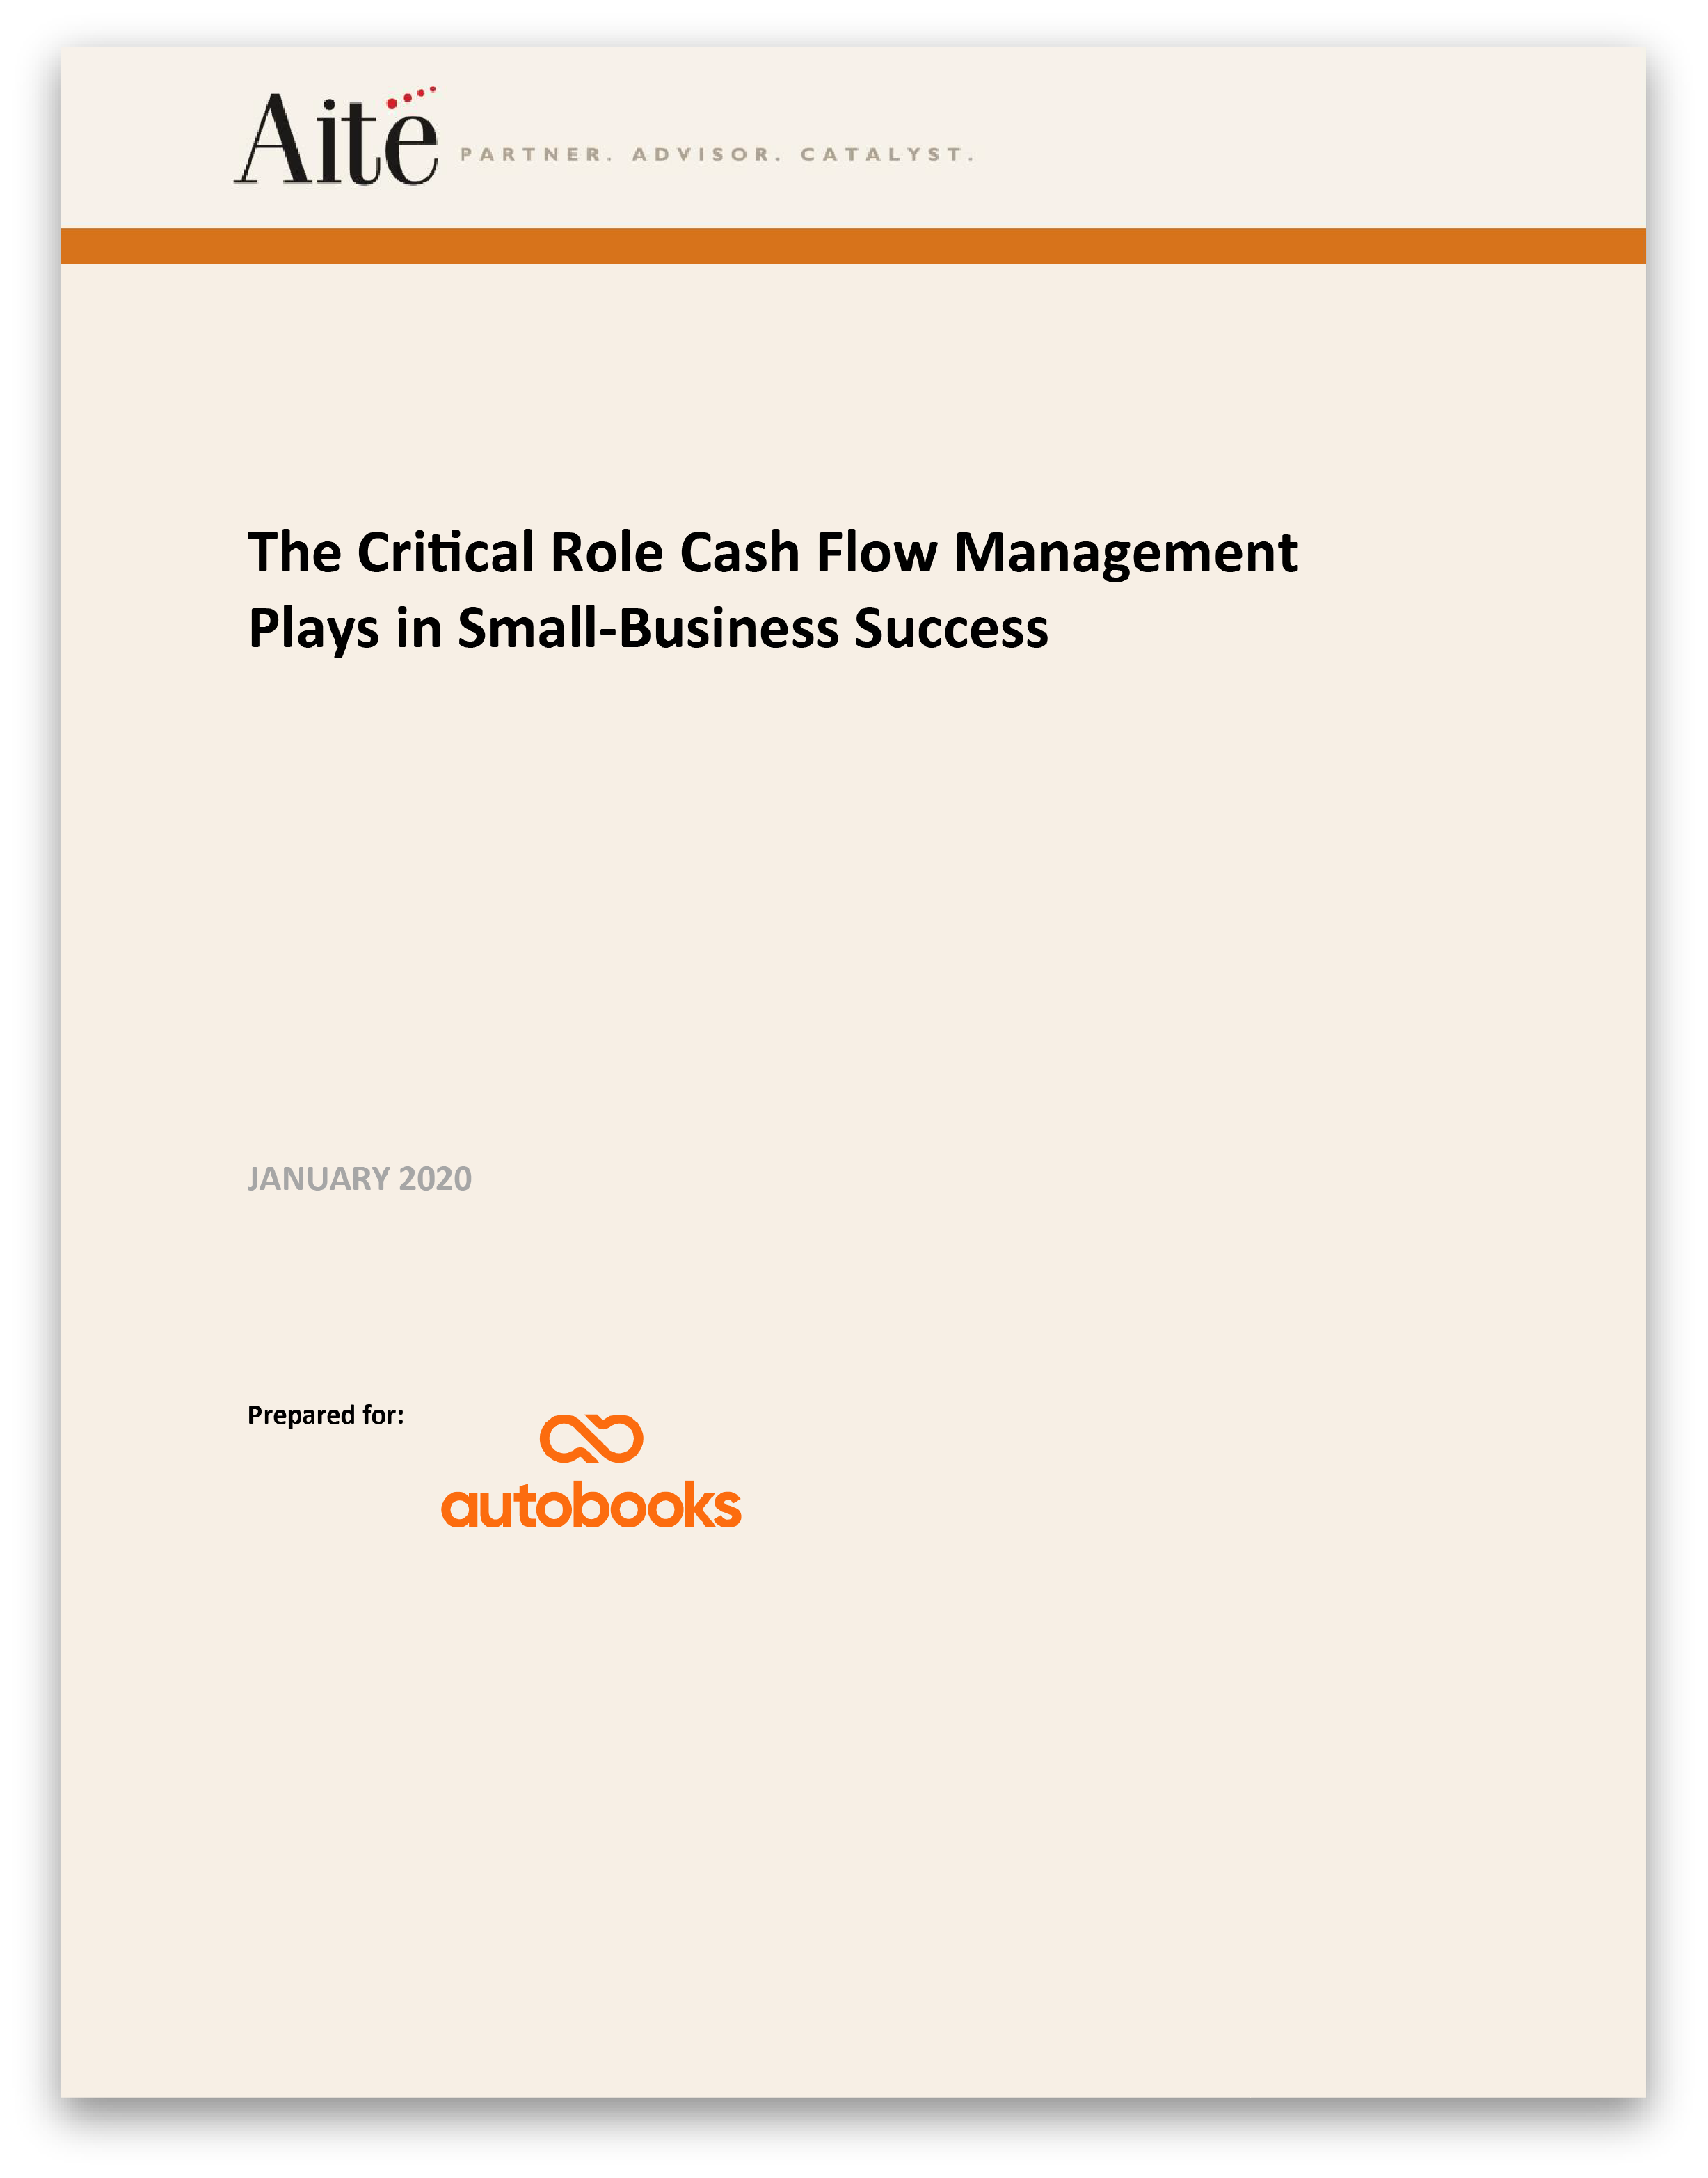 The critical role cash flow management plays in small business success